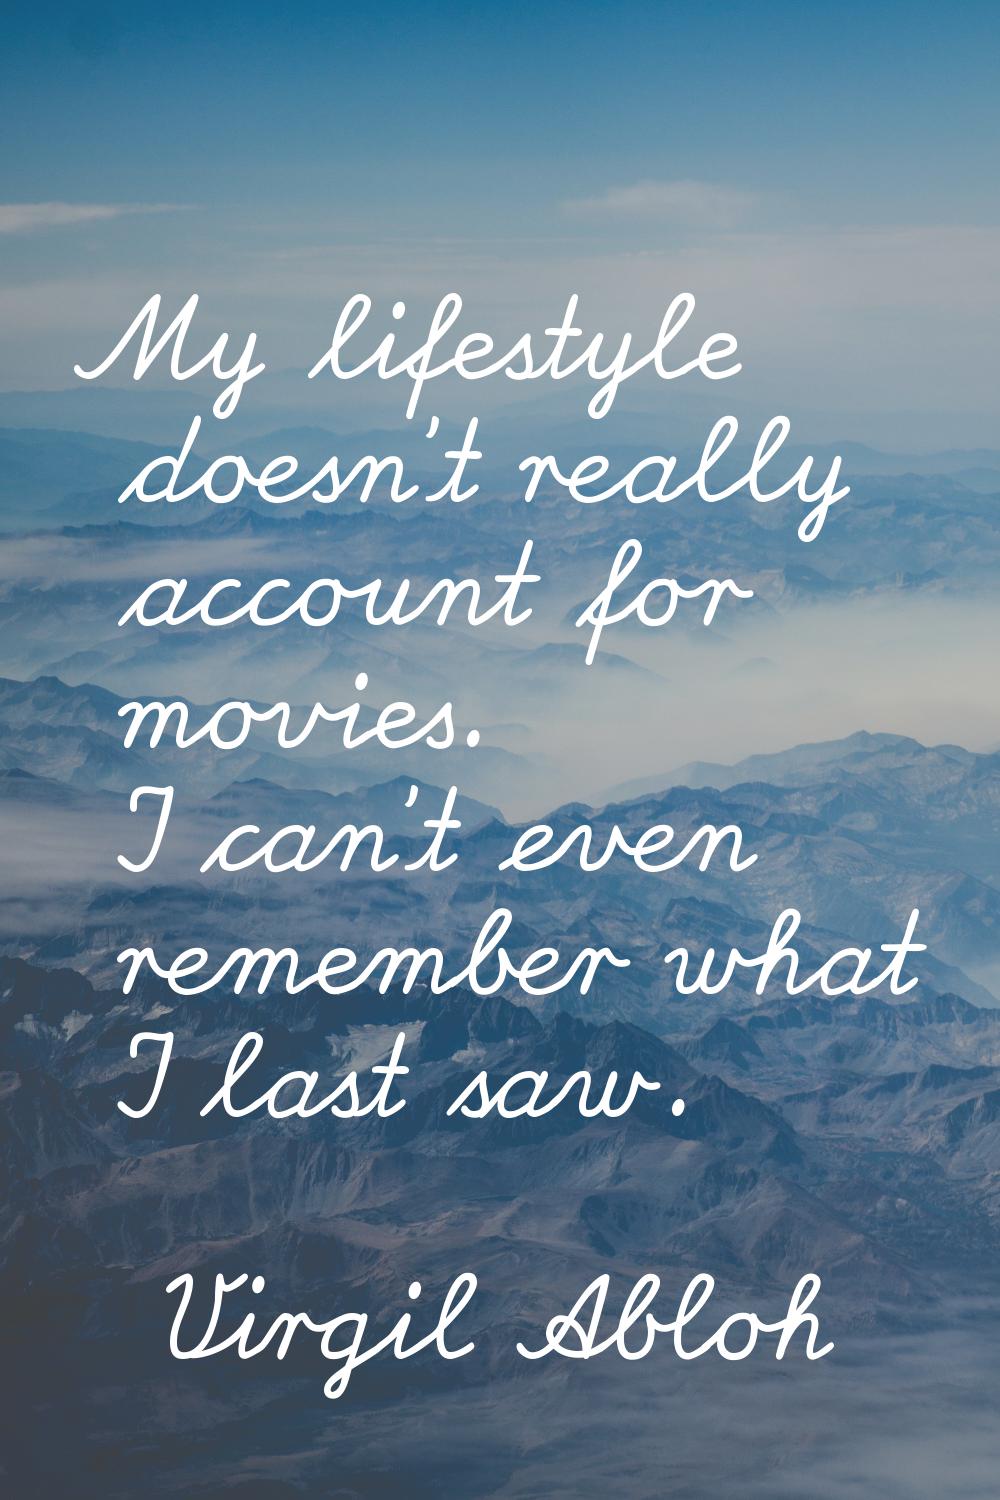 My lifestyle doesn't really account for movies. I can't even remember what I last saw.